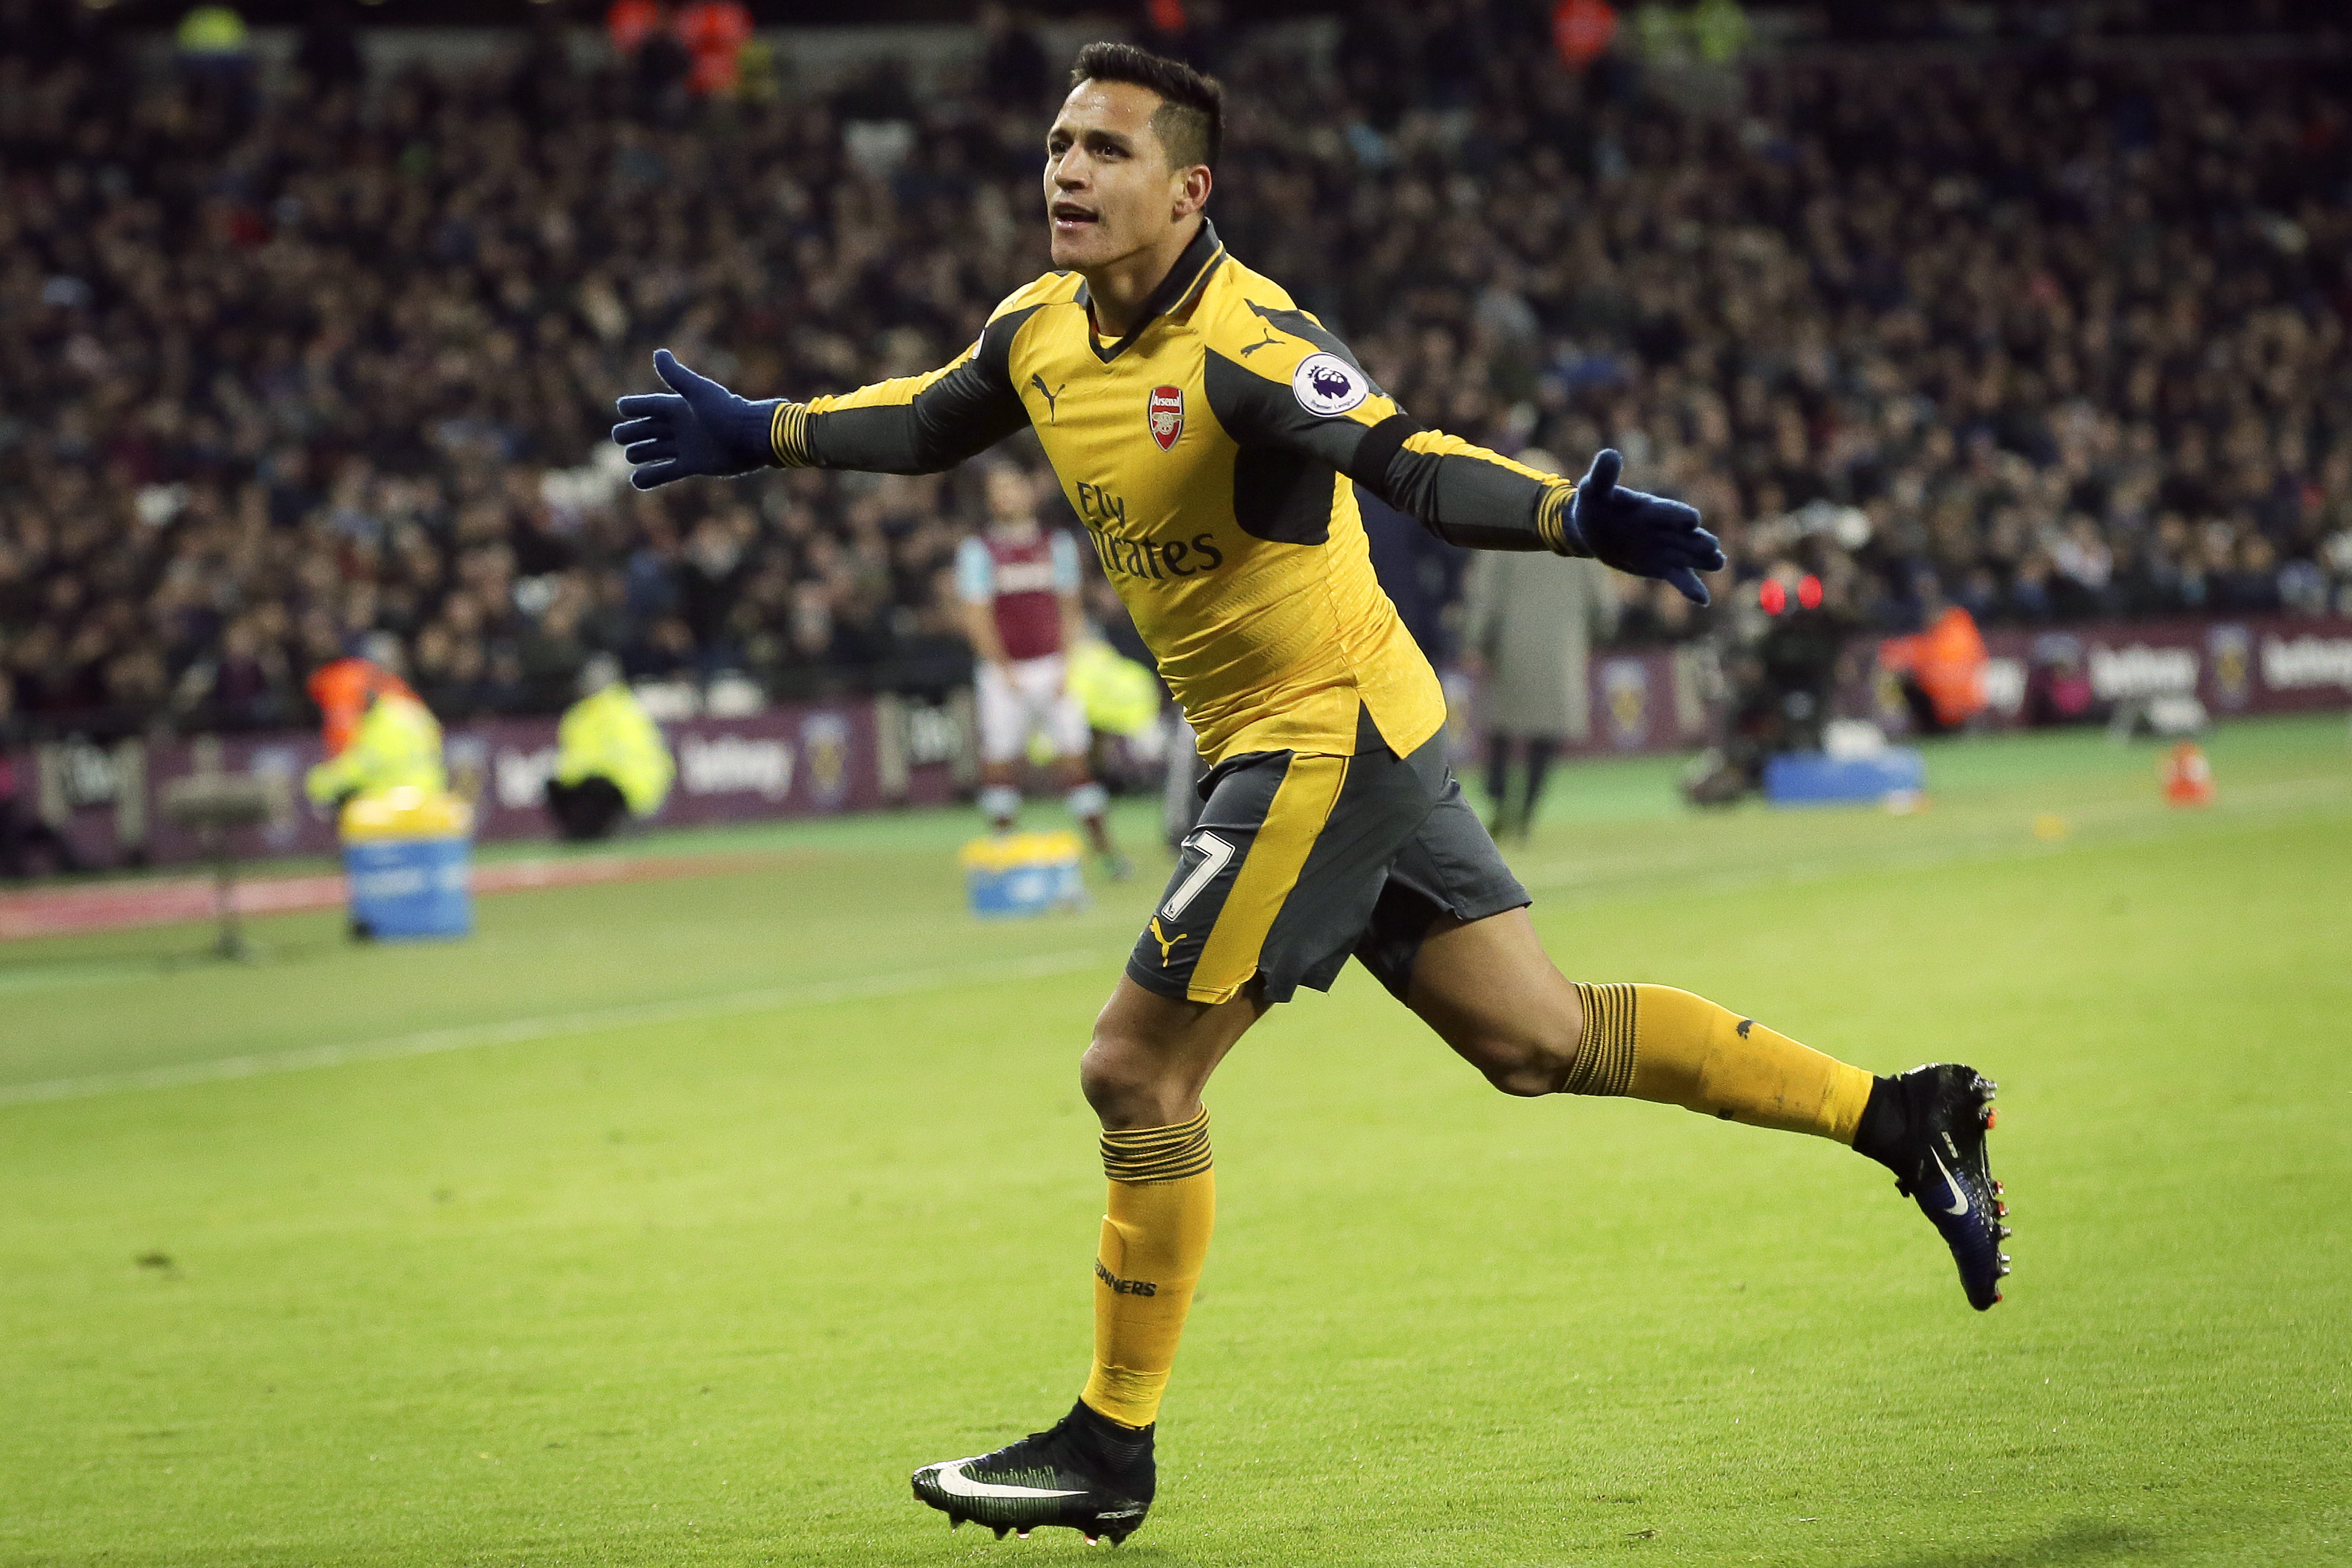 Arsenal's Alexis Sanchez celebrates after scoring a goal during the English Premier League soccer match between West Ham United and Arsenal at The London Stadium in London, Saturday Dec. 3, 2016. (AP Photo/Tim Ireland)